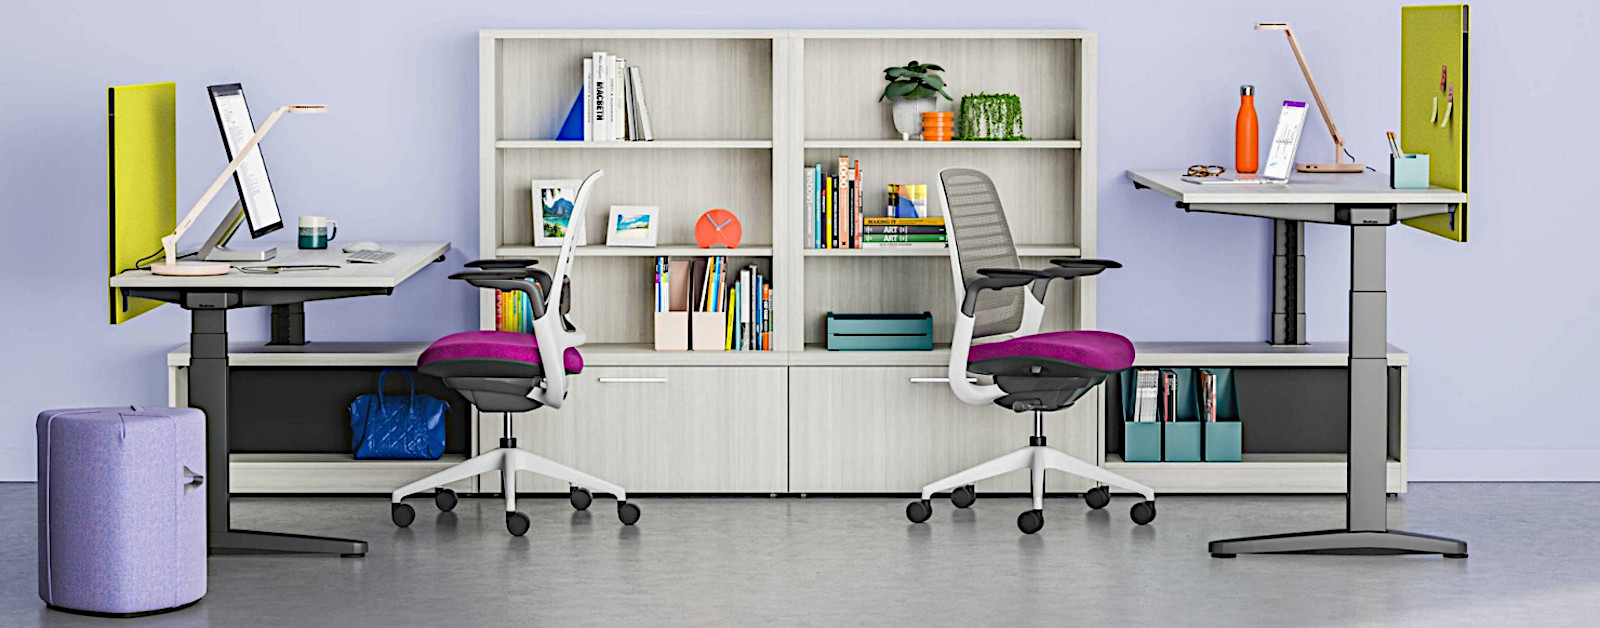 Low price Steelcase home office essentials